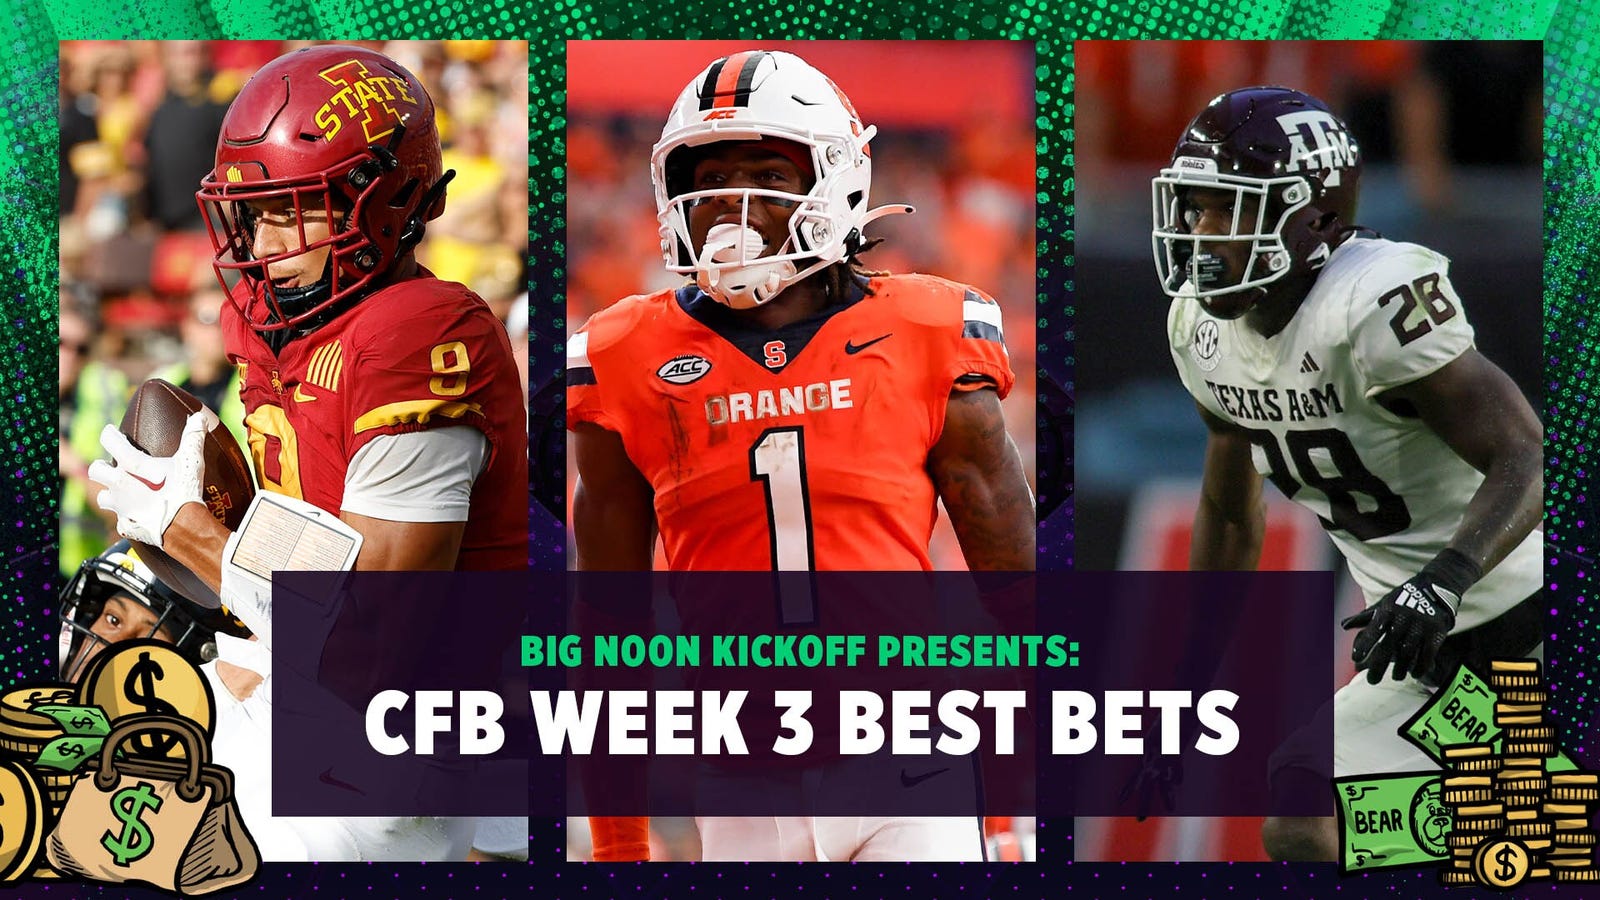 CFB Week 3 Best Bets: Iowa State at Ohio, Syracuse at Purdue, UL Monroe at Texas A&M 